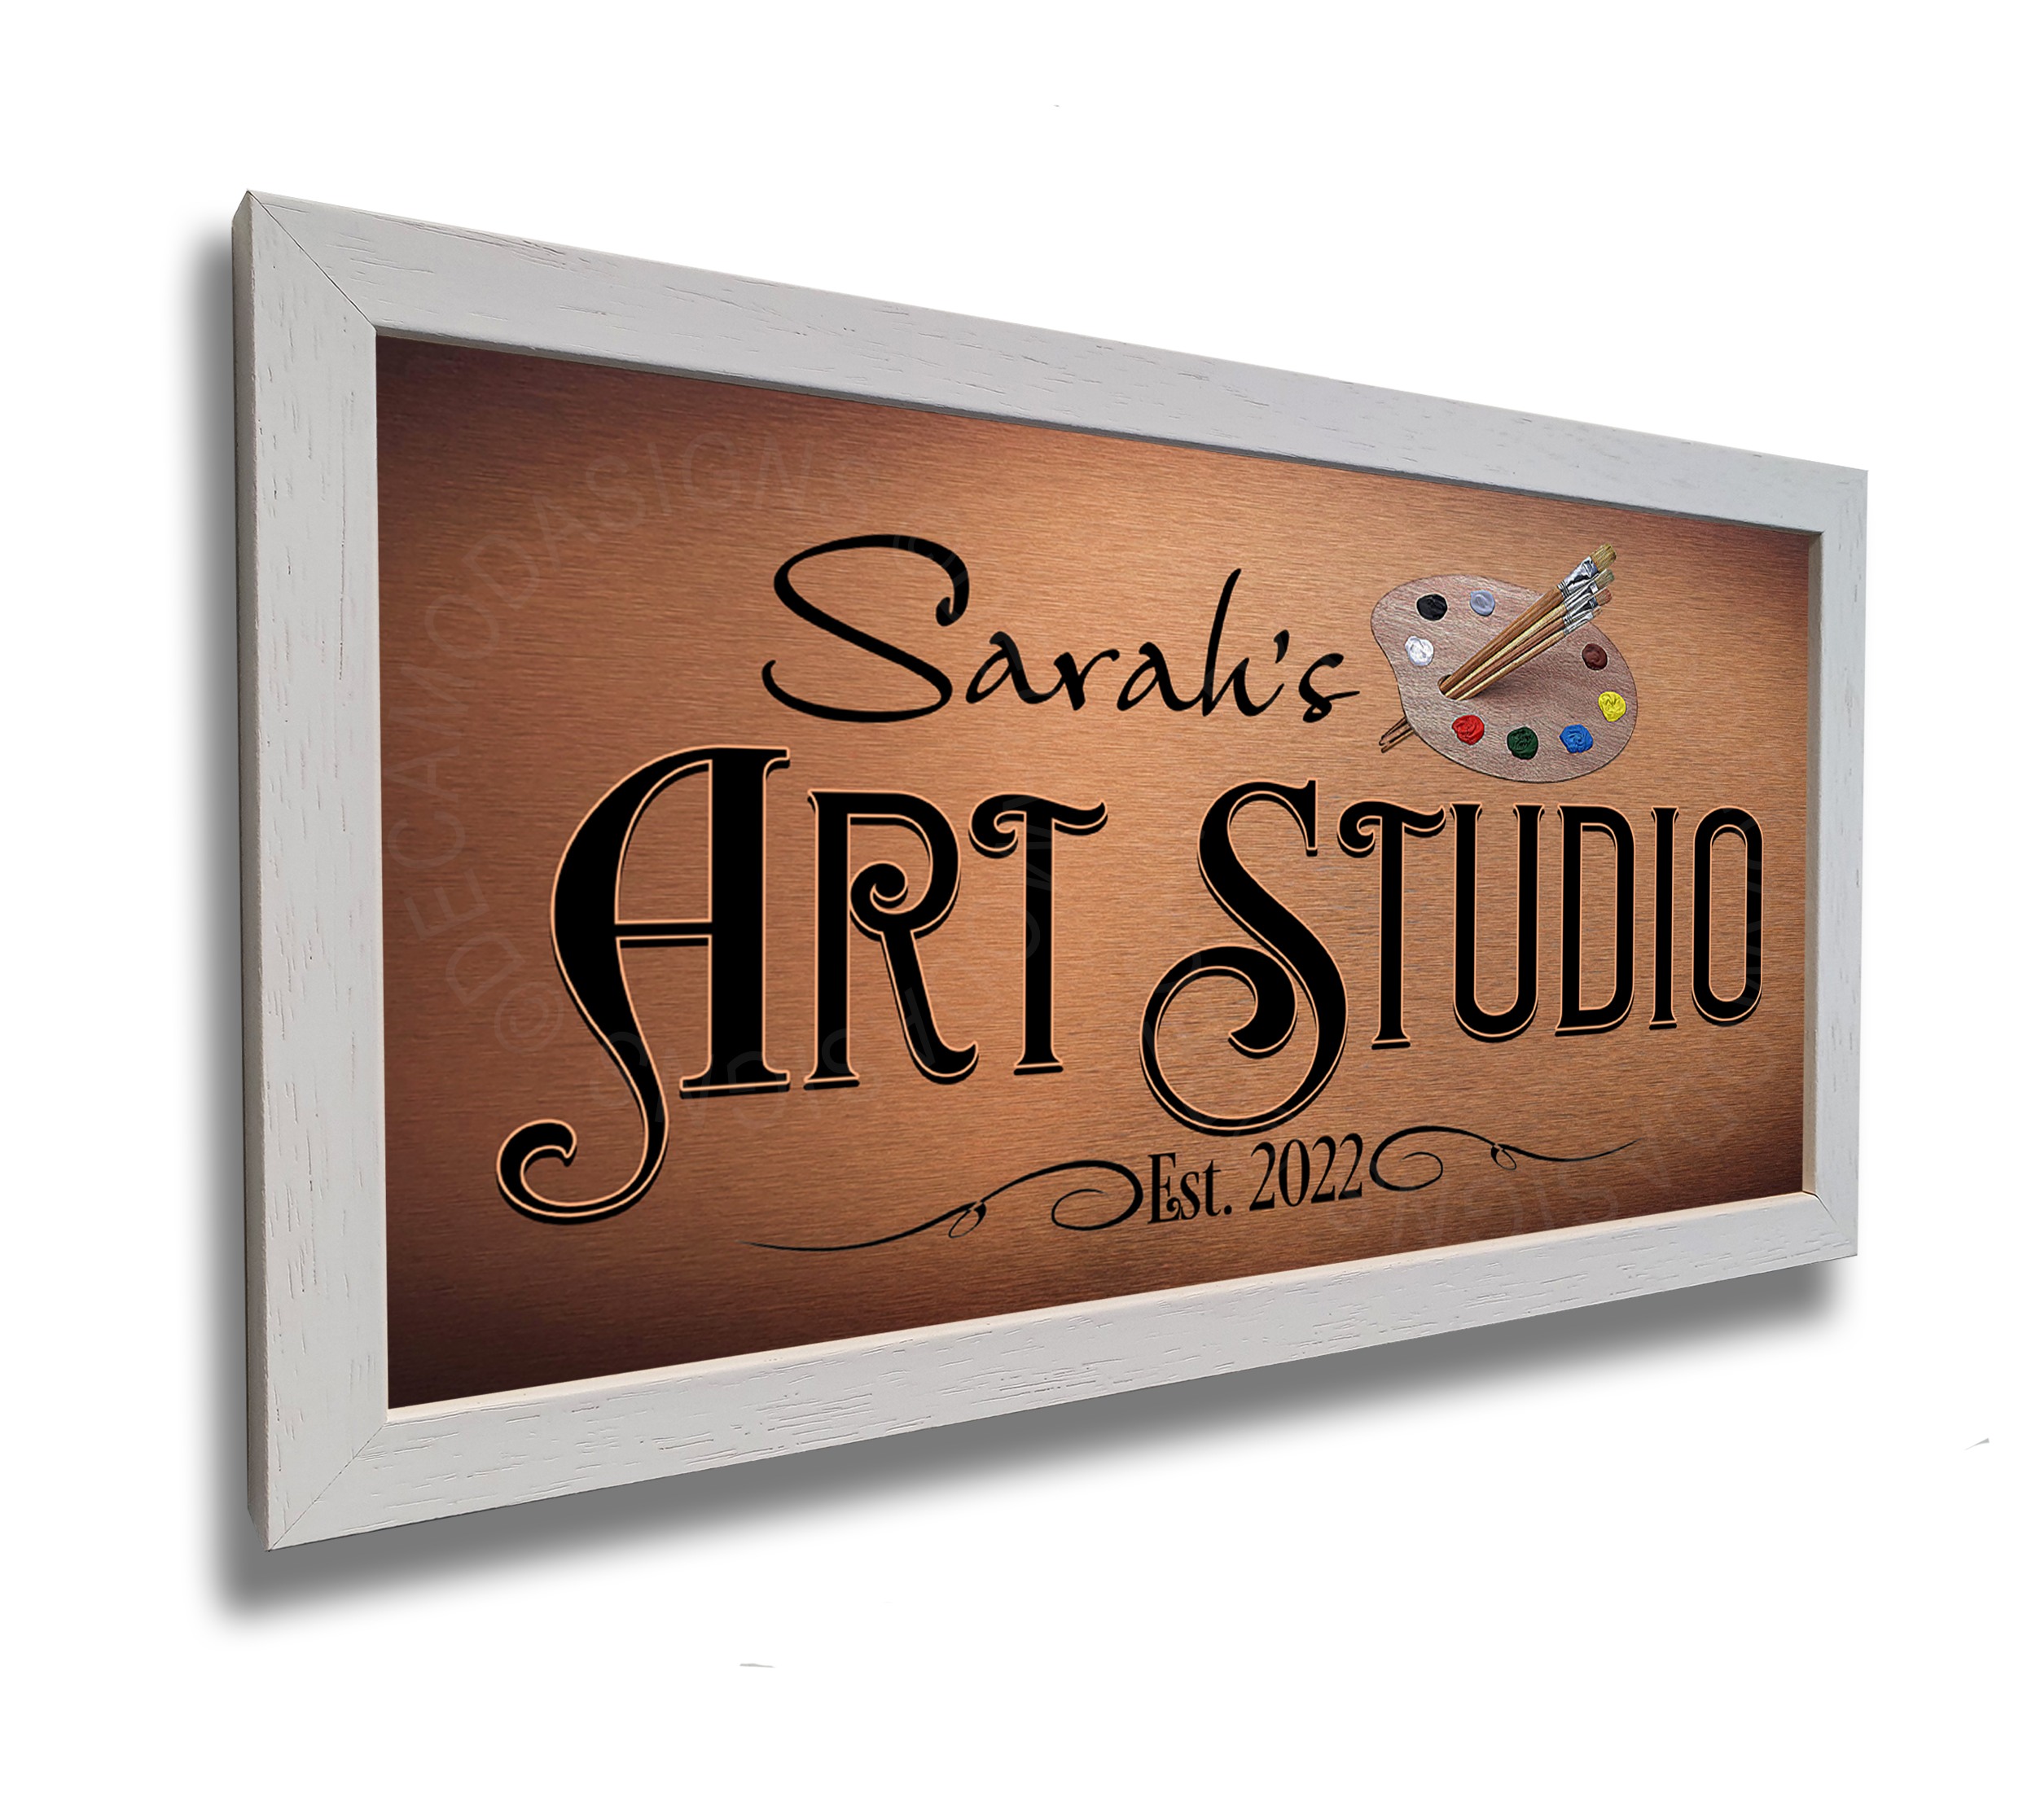 Concise Sign For An Art Studio An Emblem For An Creative Workshop Stock  Illustration - Download Image Now - iStock